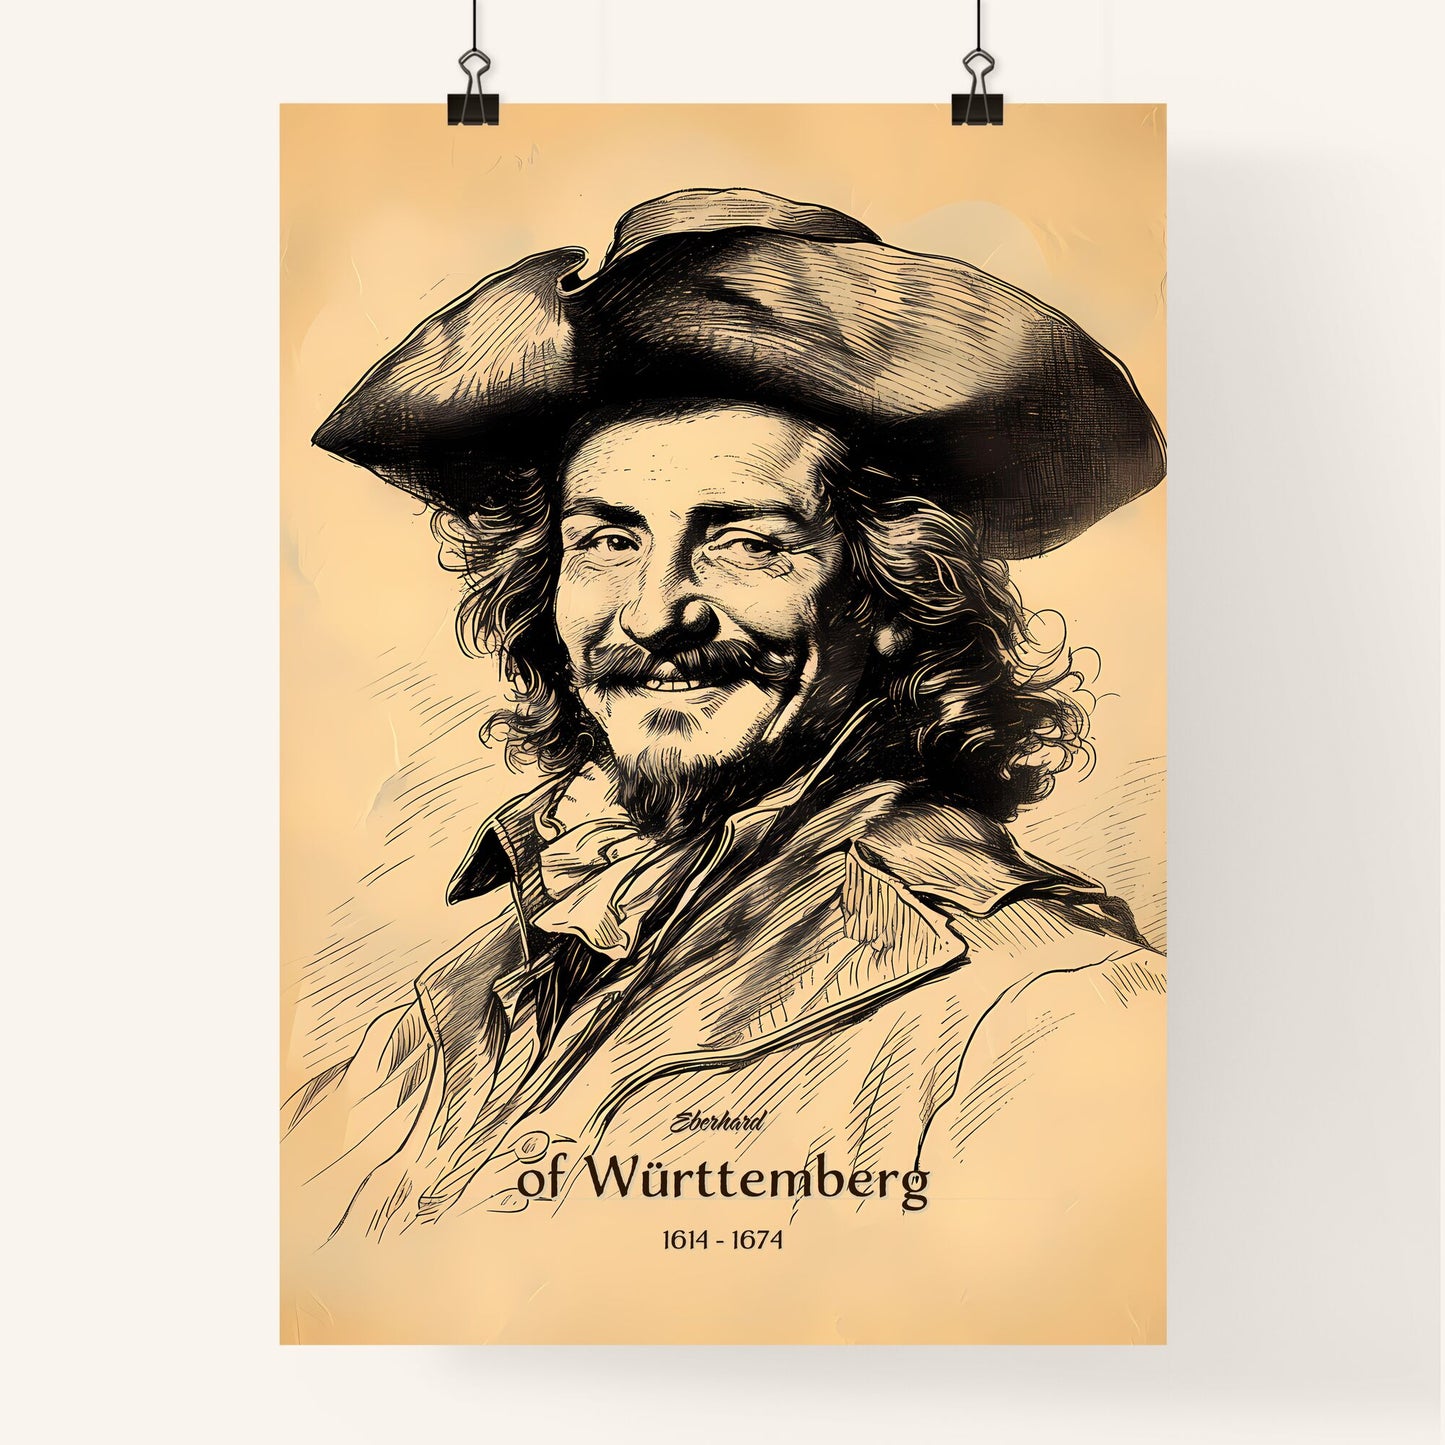 Eberhard, of Württemberg, 1614 - 1674, A Poster of a man wearing a hat Default Title